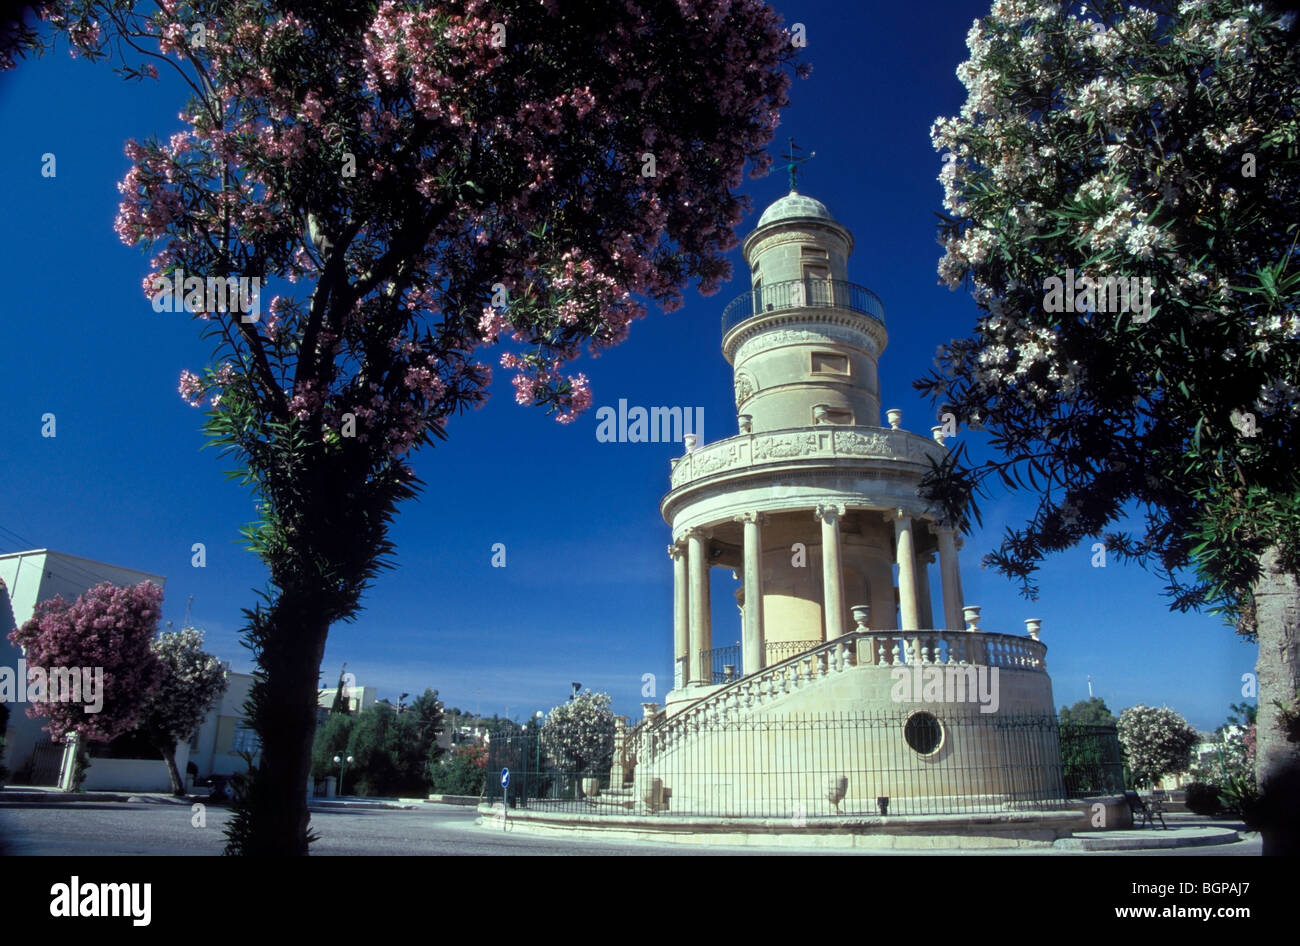 Malta, an atmospheric tower in the town of Lija fringed by oleander trees in full colourful flower bloom Stock Photo